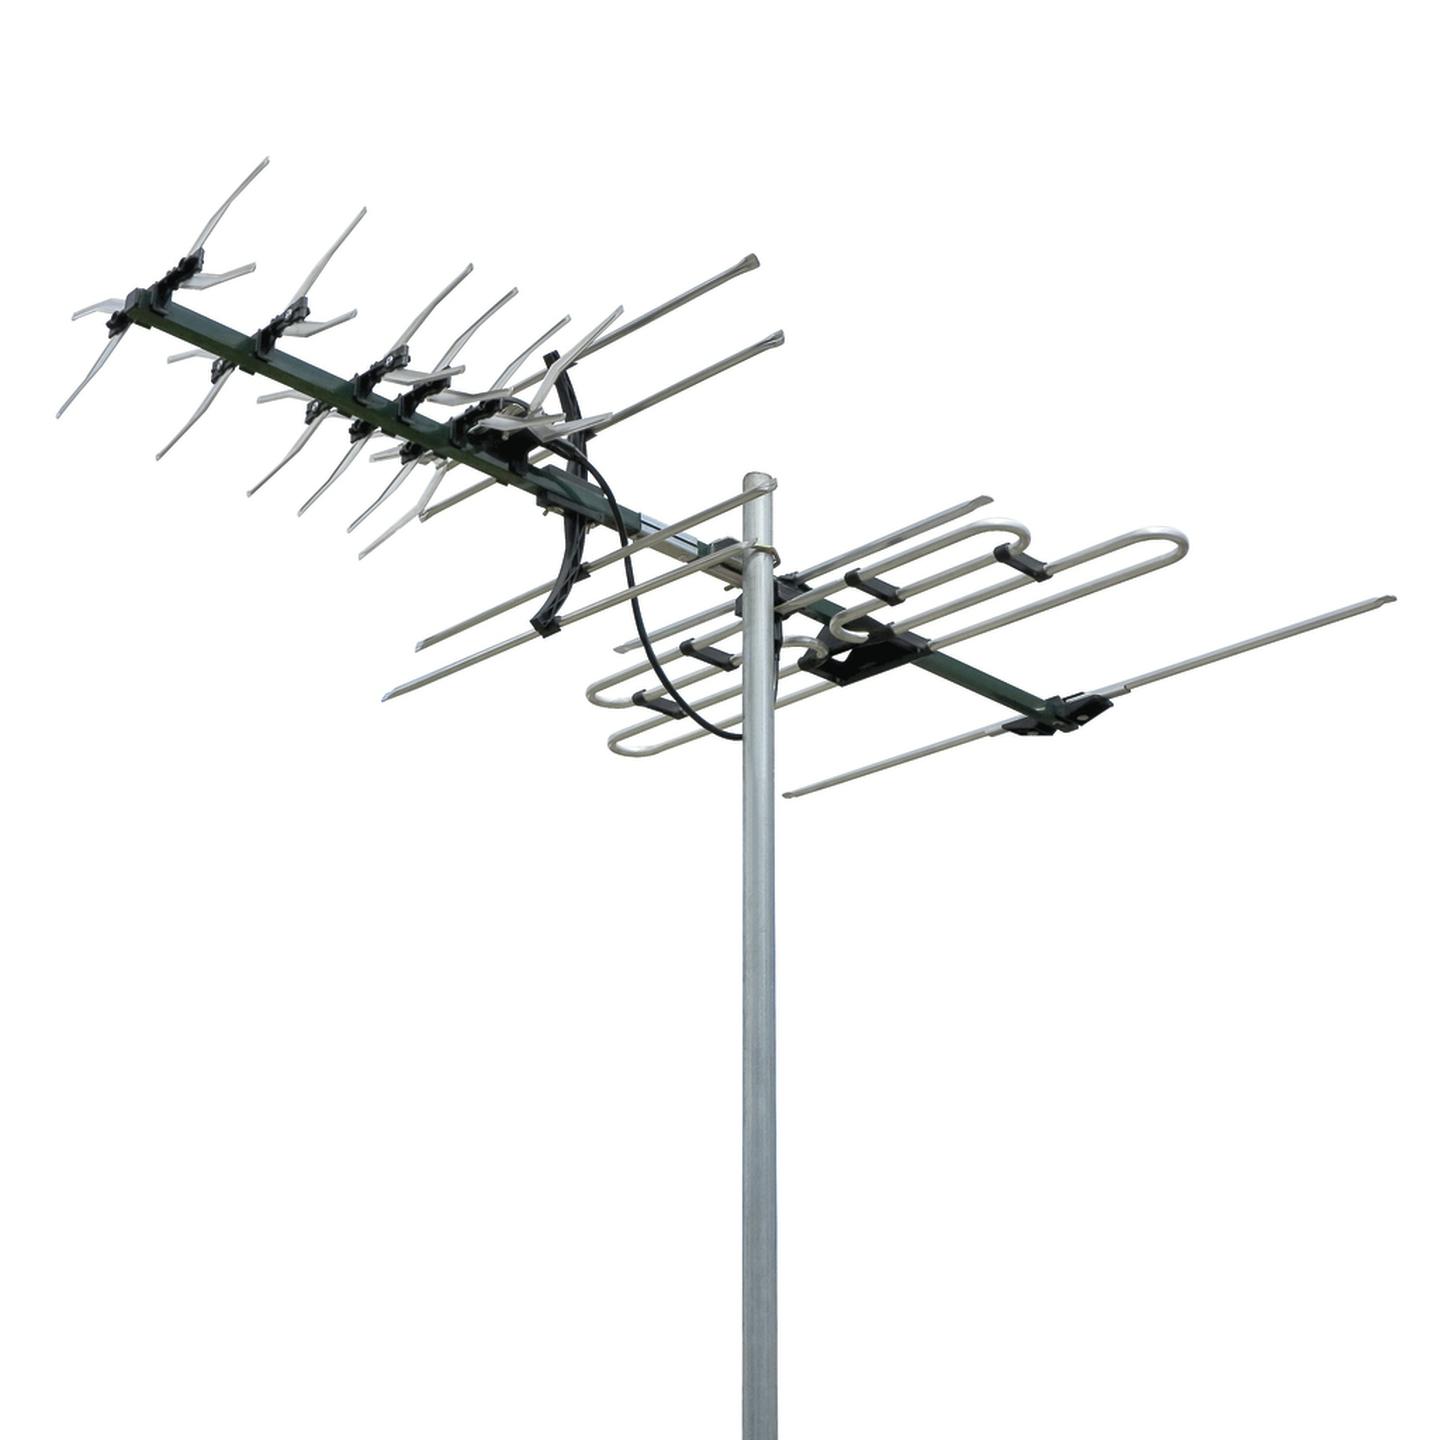 Digimatch VHF/UHF X-type Colinear 27 Element Receives Band 3 4 and 5 Channel 6-12 and 28-46